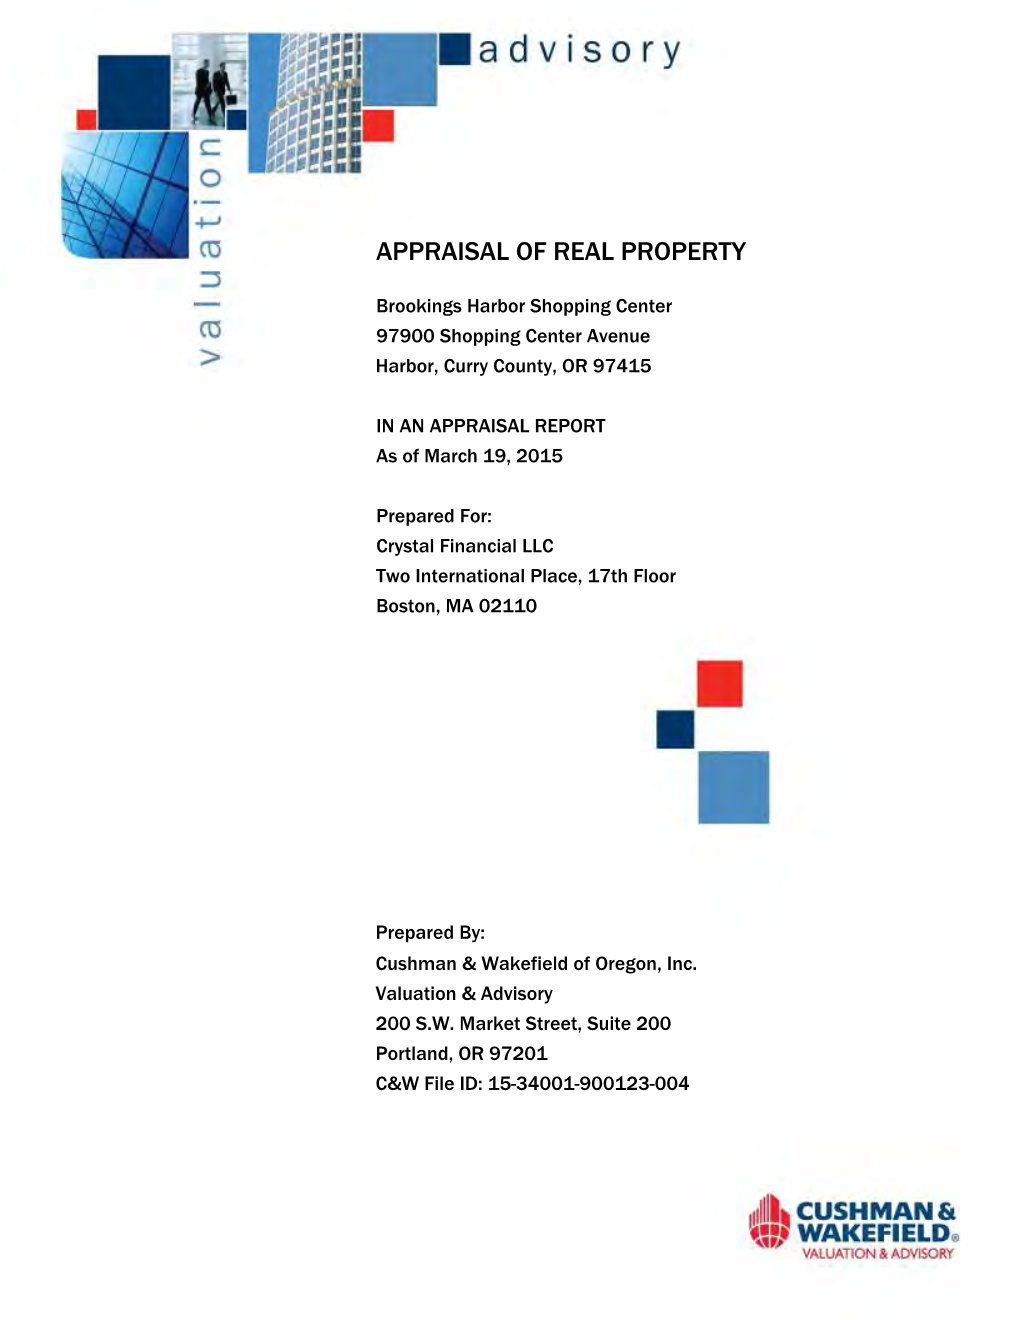 Appraisal of Real Property